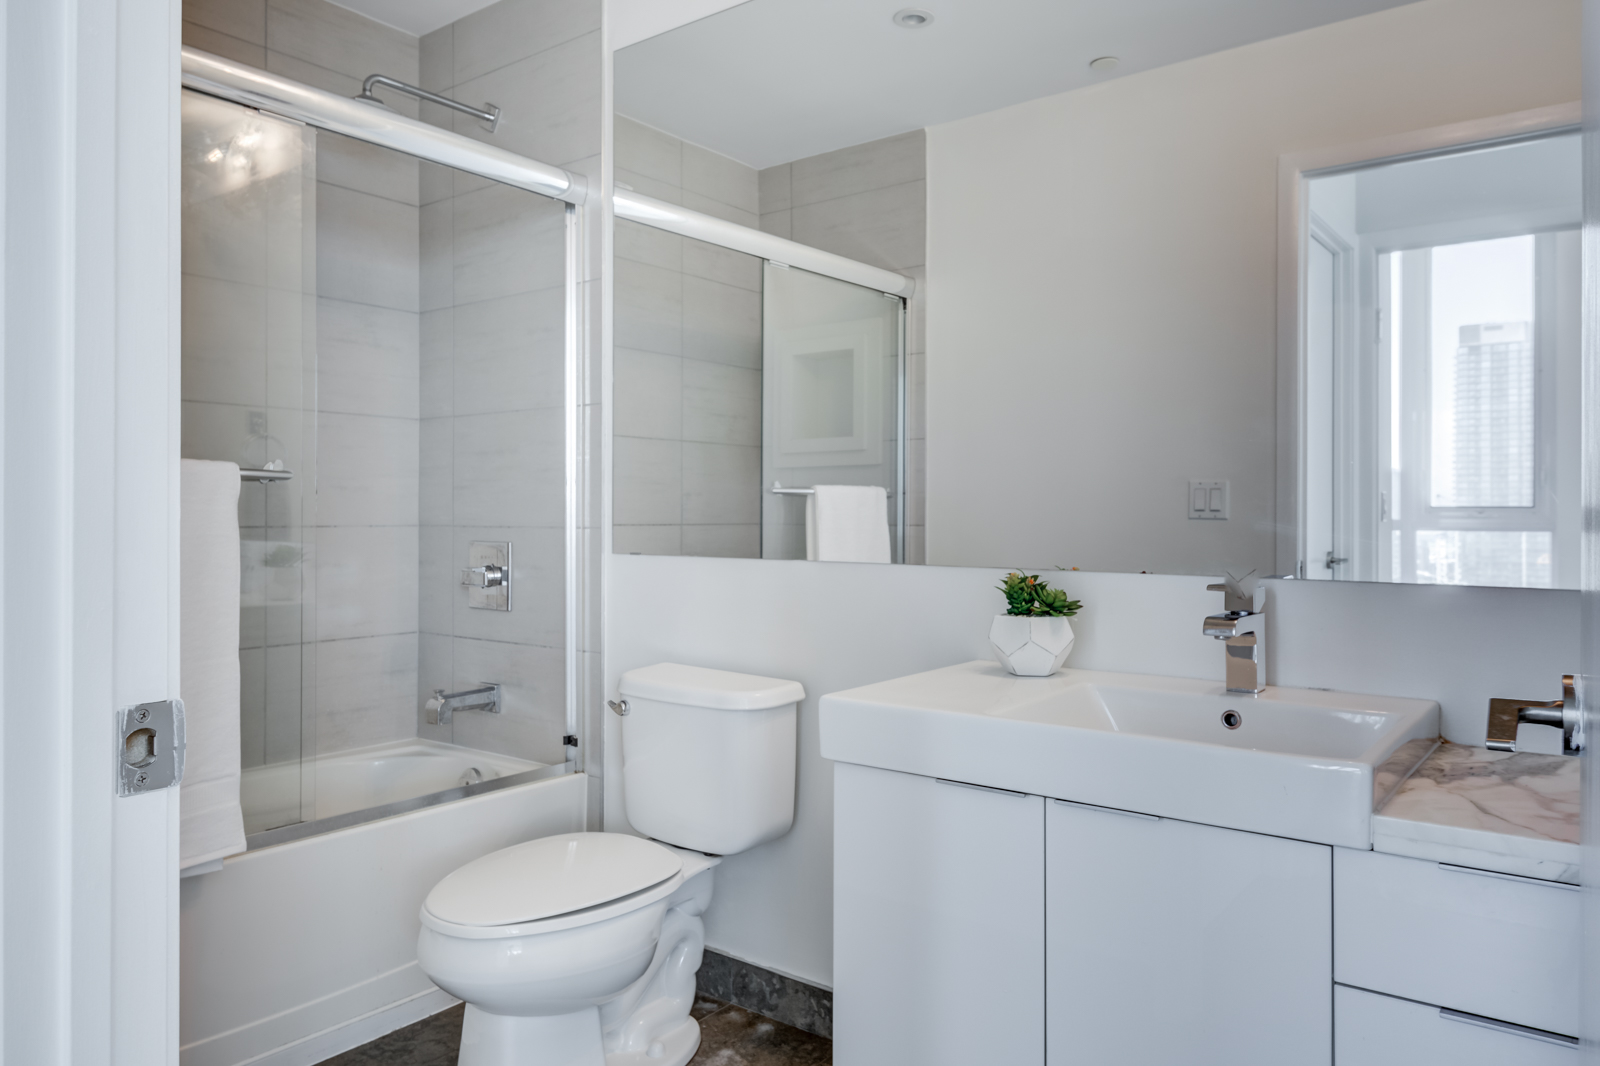 Second bathroom with tub and porcelain tiles at Victory Lofts Penthouse Suite in 478 King St W Toronto.